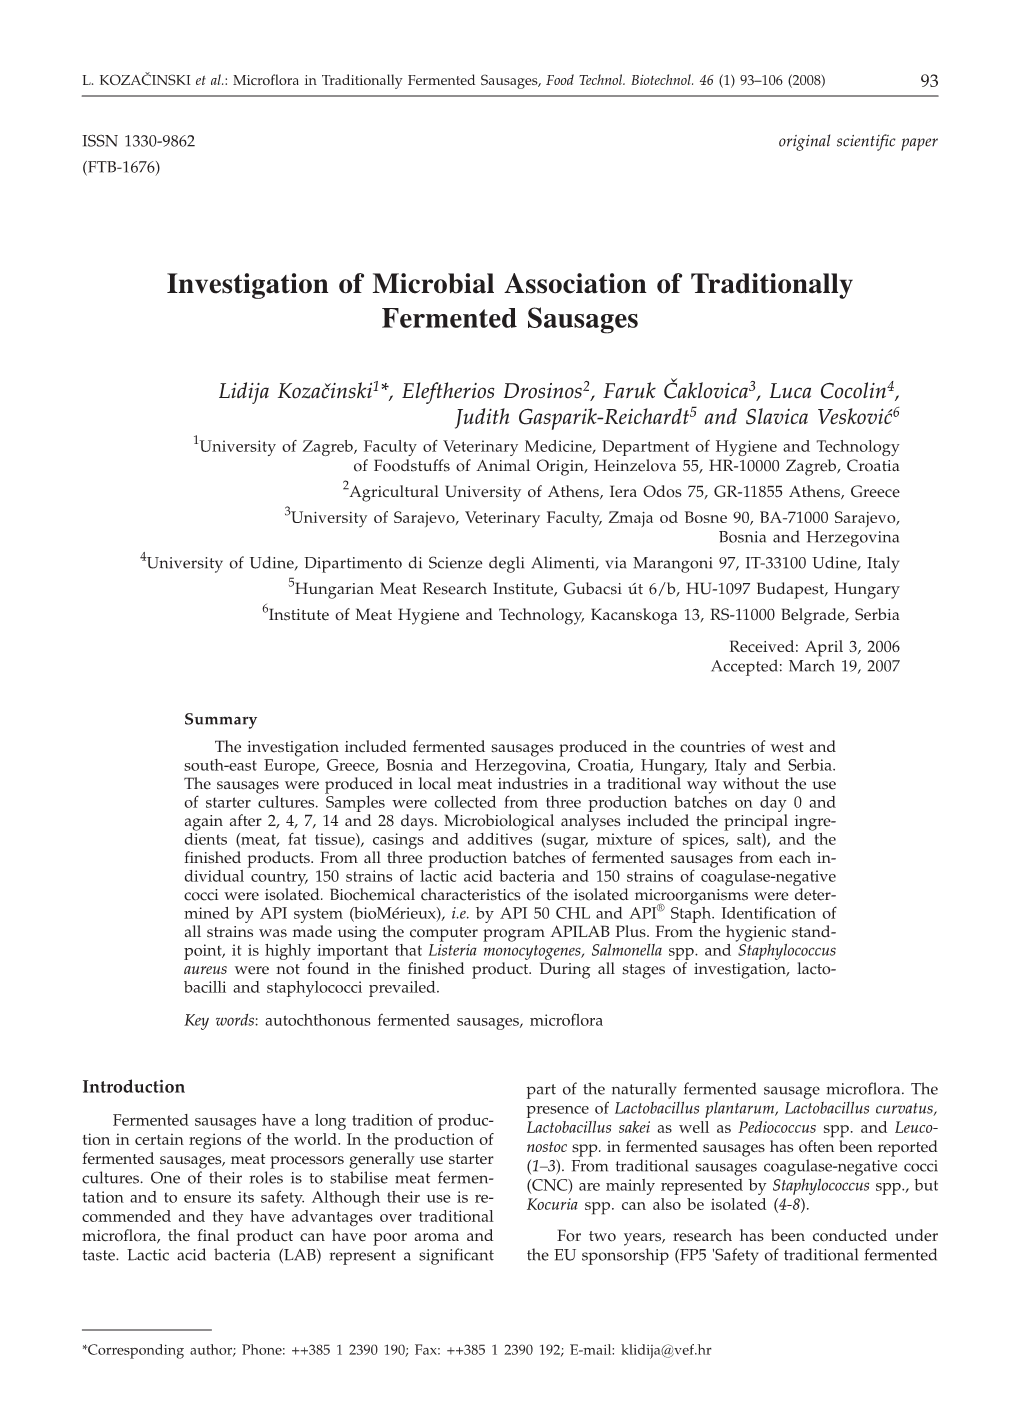 Investigation of Microbial Association of Traditionally Fermented Sausages